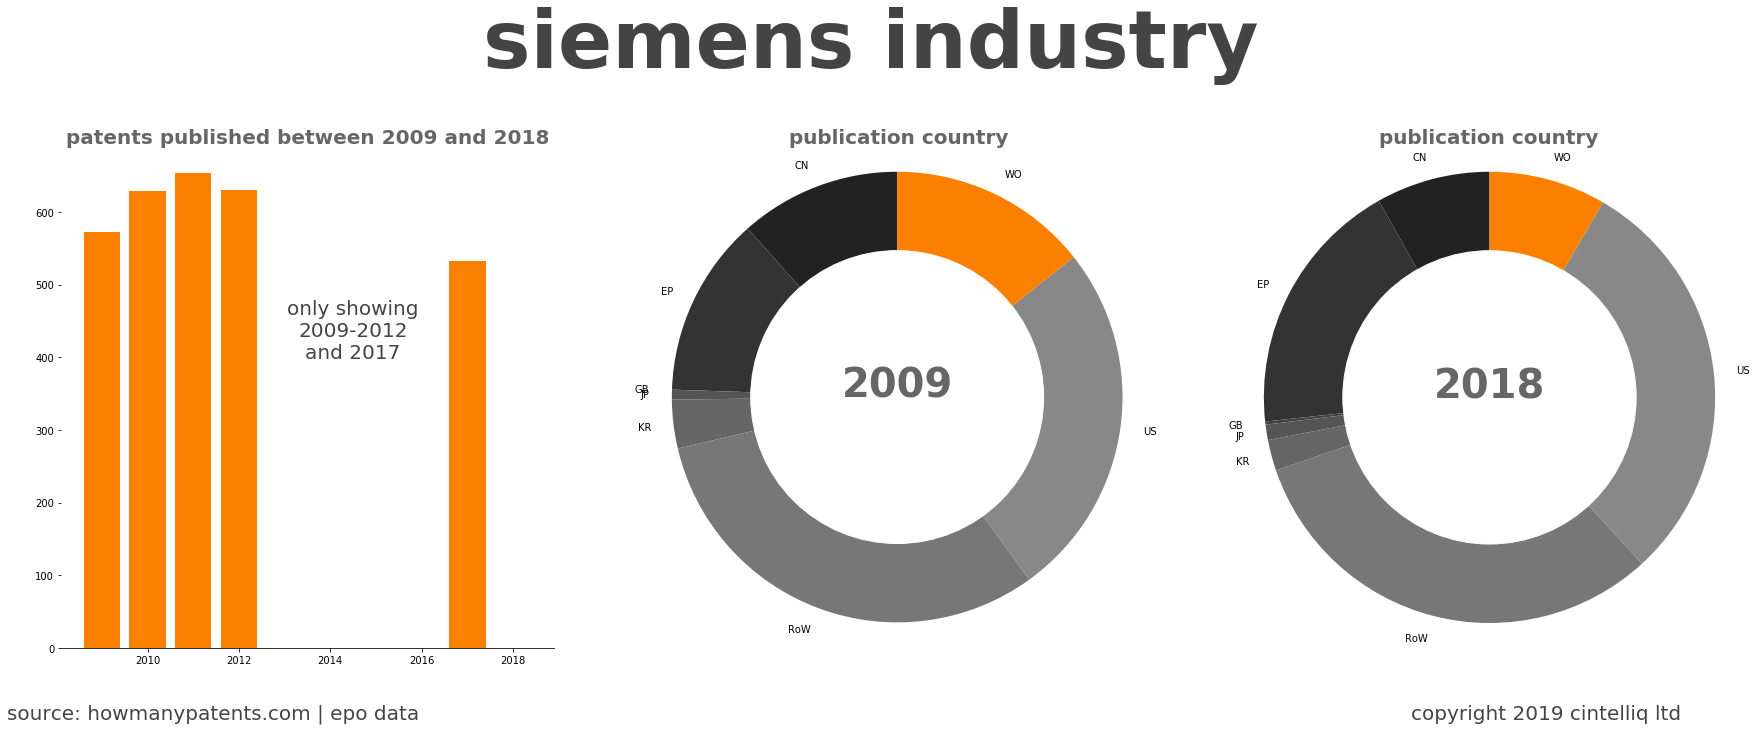 summary of patents for Siemens Industry